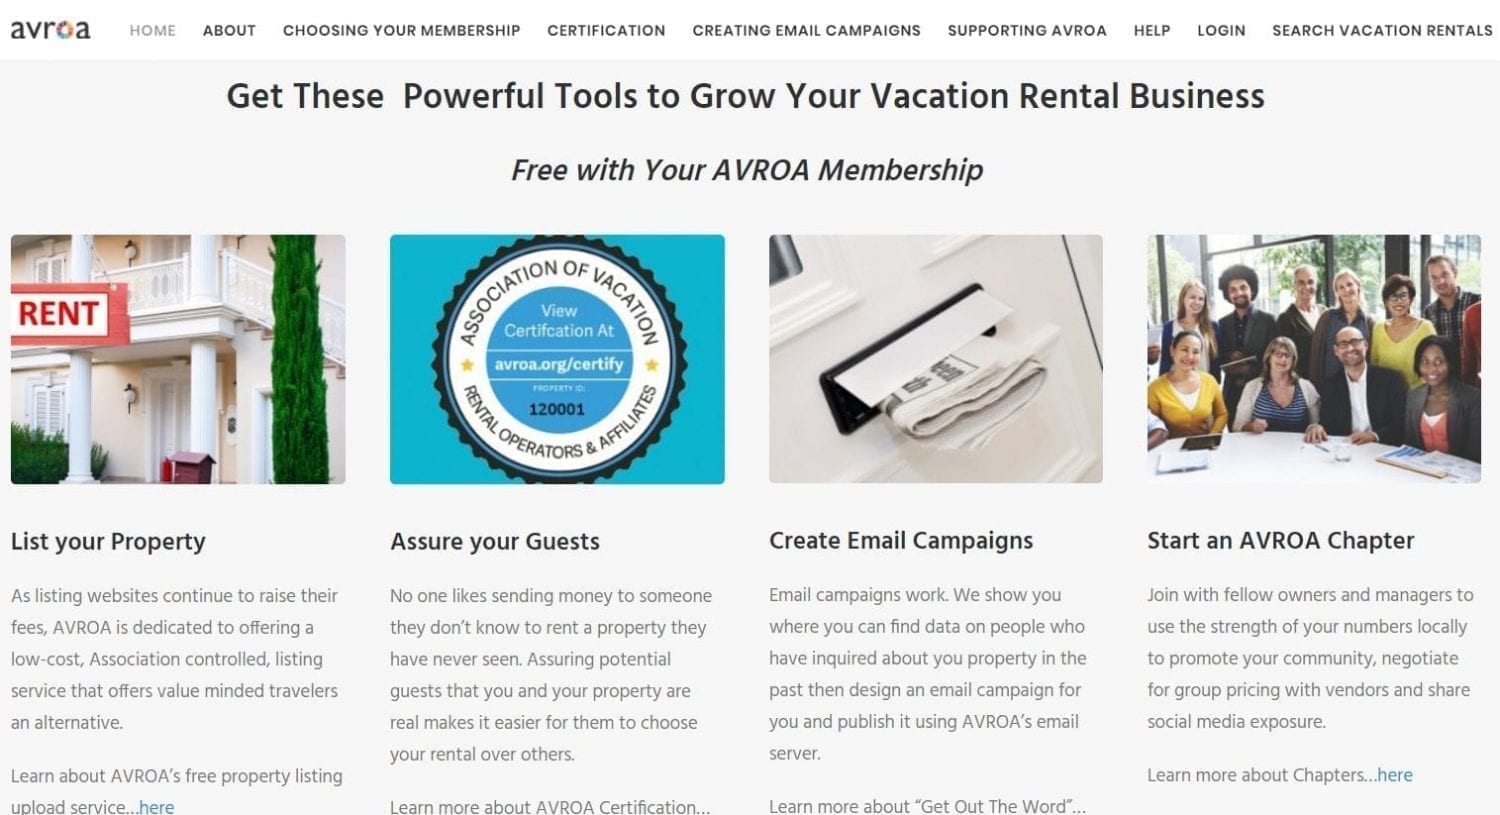 AVROA Association for Vacation Rental Owners and Operators